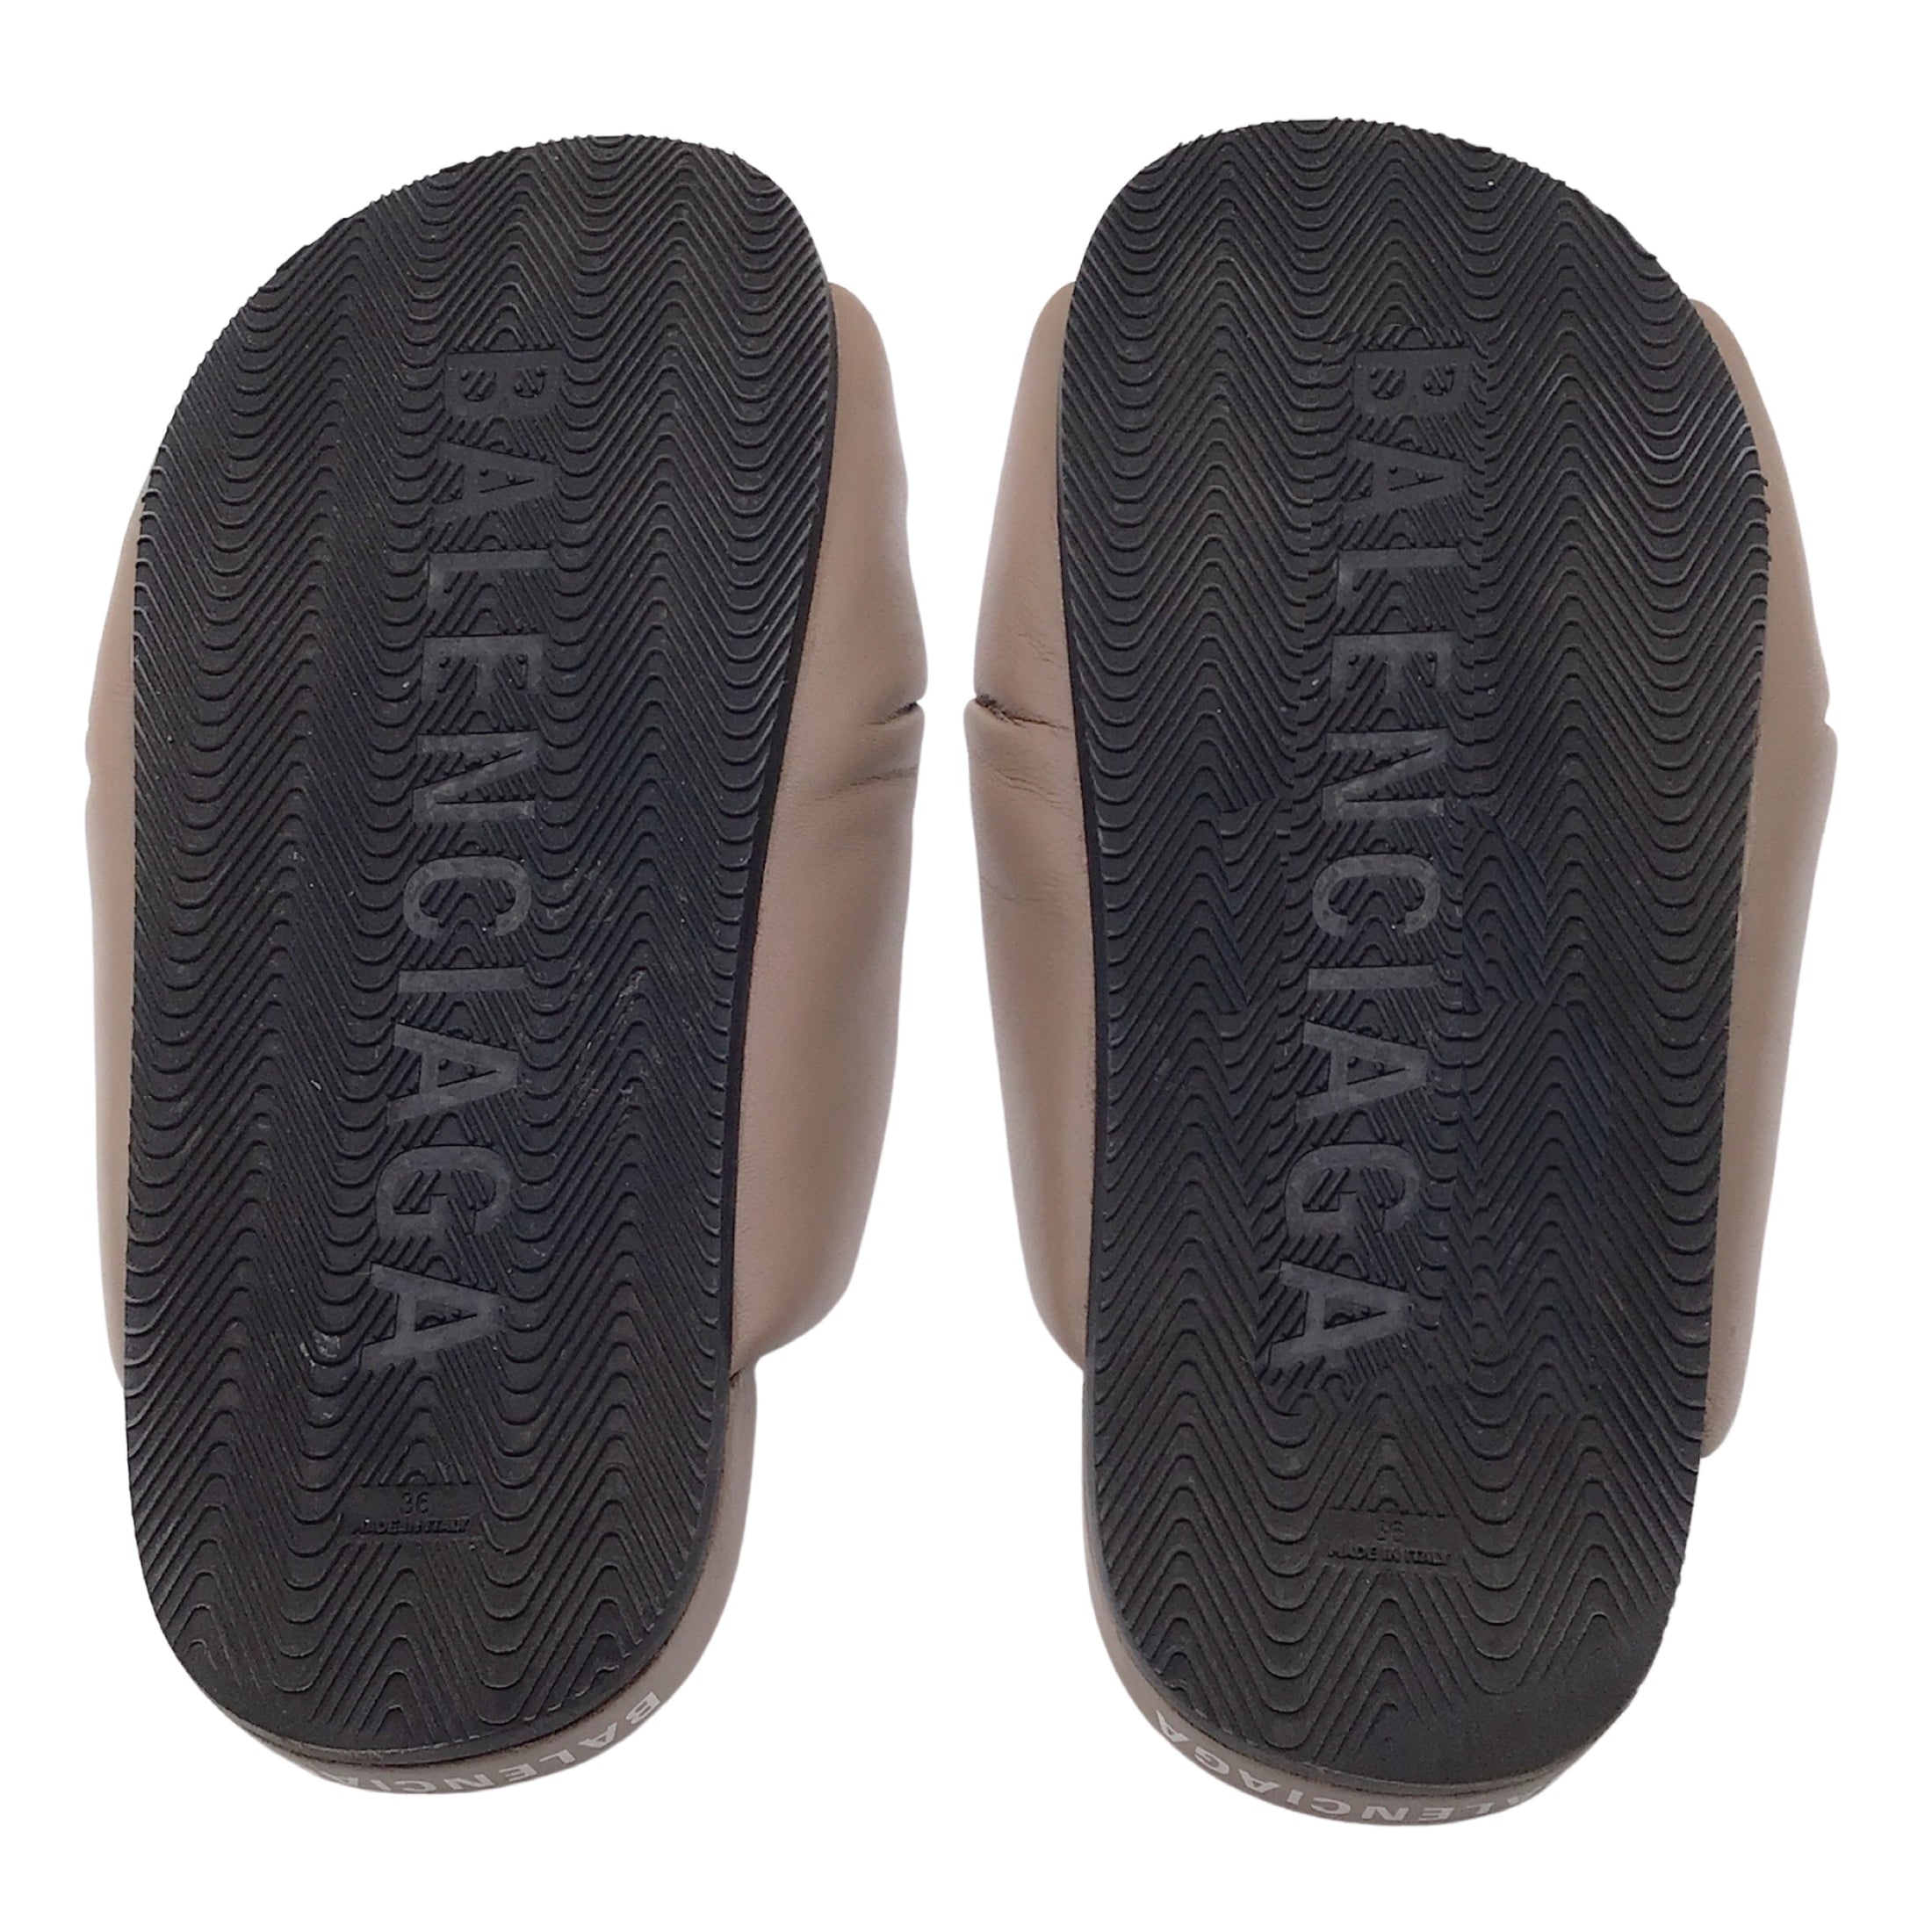 Balenciaga Puffy Knotted Smooth Nappa Leather Slide Sandals in Mink Grey